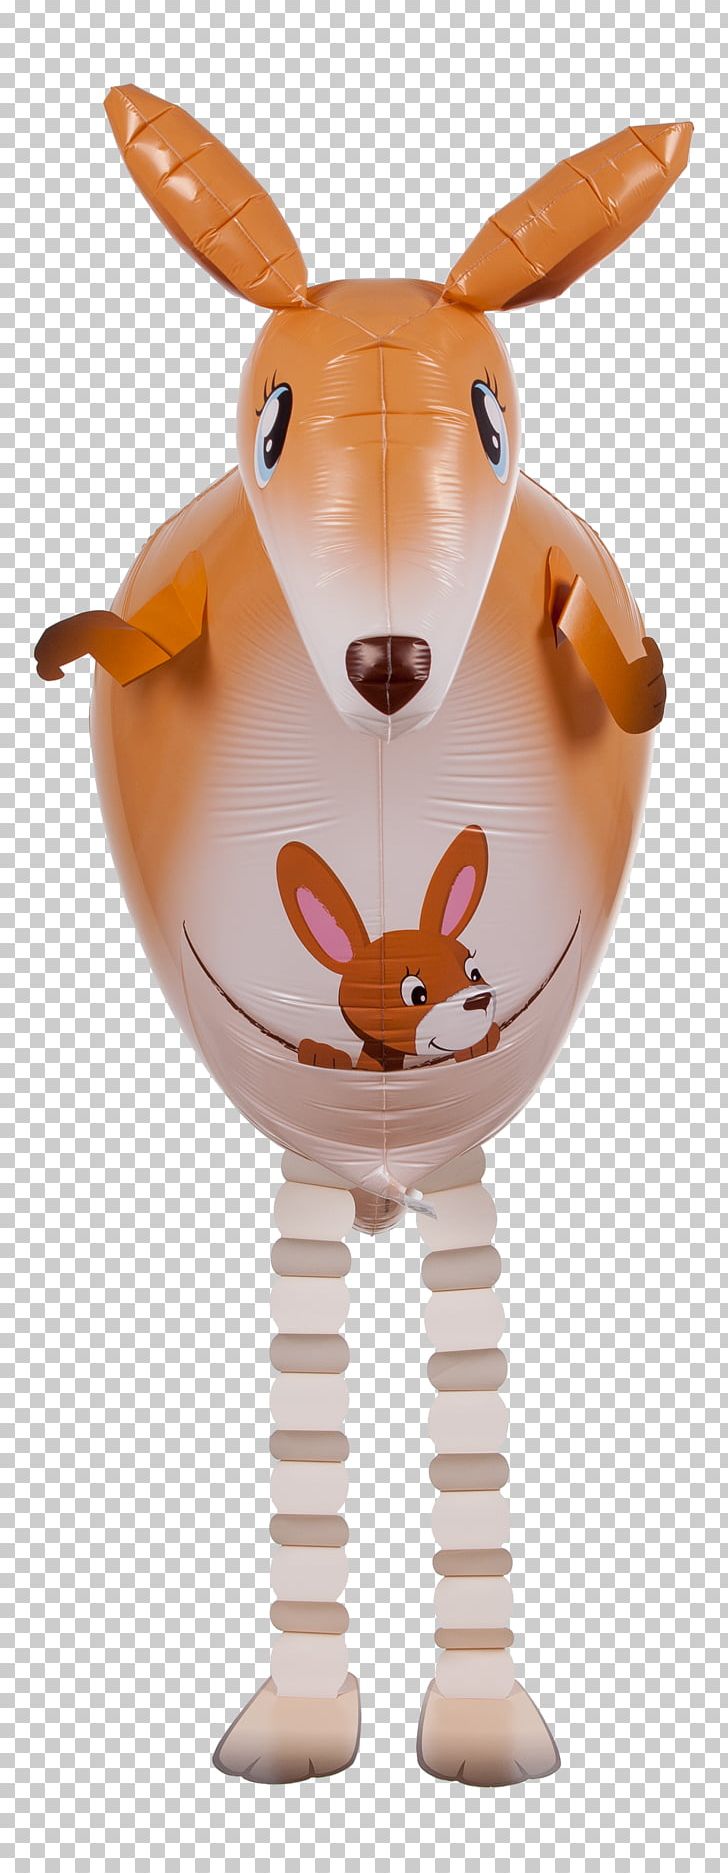 Macropodidae Easter Bunny Toy Balloon Rabbit Child PNG, Clipart, Animals, Balloon, Cartoon, Child, Easter Free PNG Download